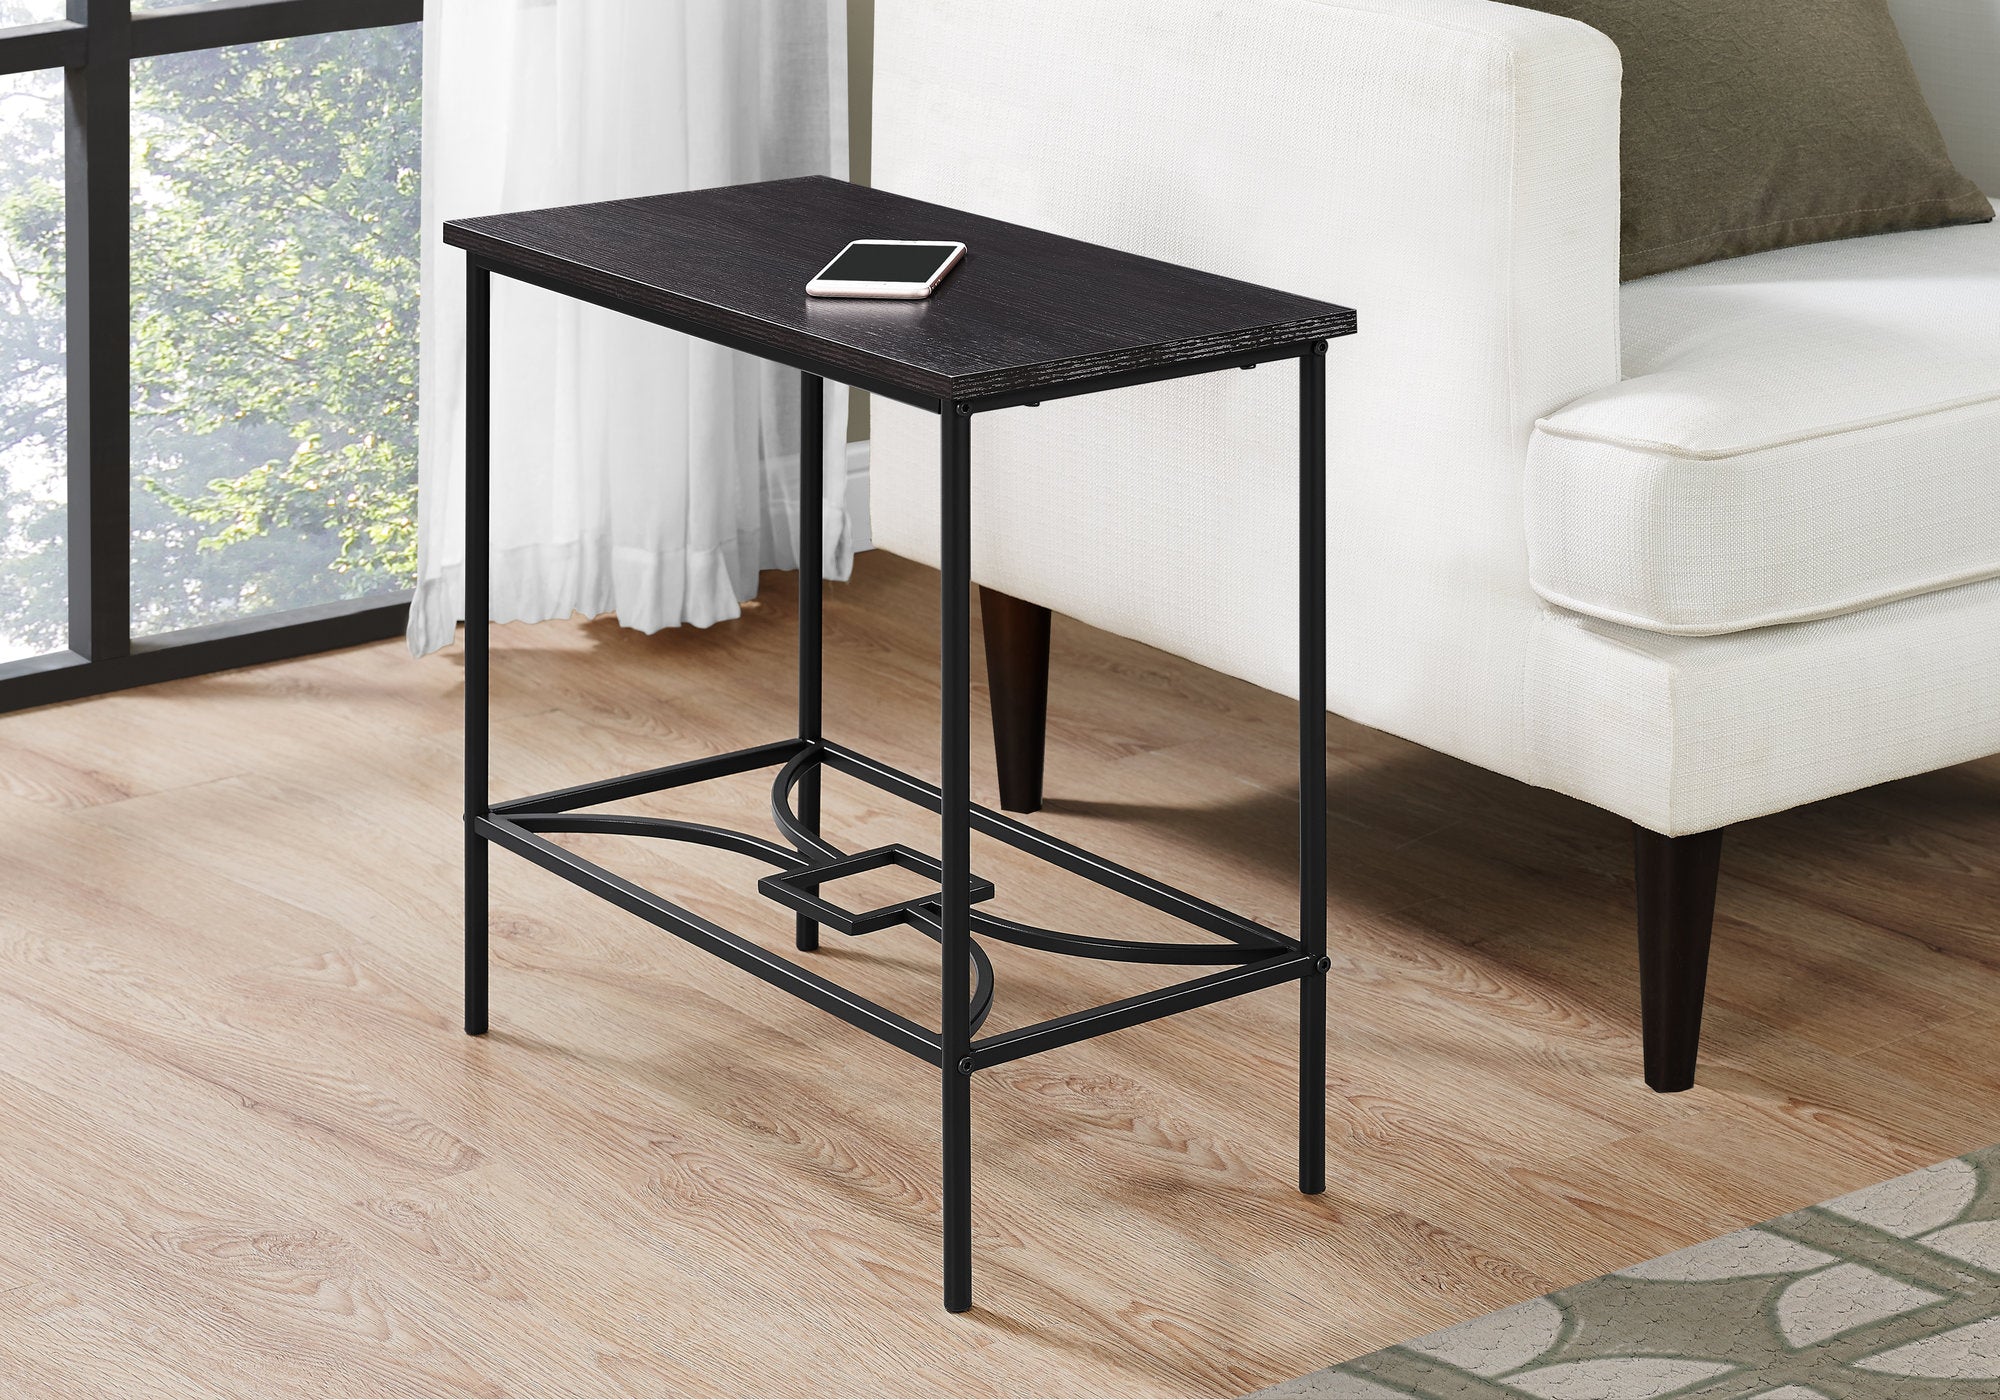 MN-832076    Accent Table, Side, End, Narrow, Small, Living Room, Bedroom, 2 Tier, Metal Legs, Laminate, Dark Brown, Black, Contemporary, Modern